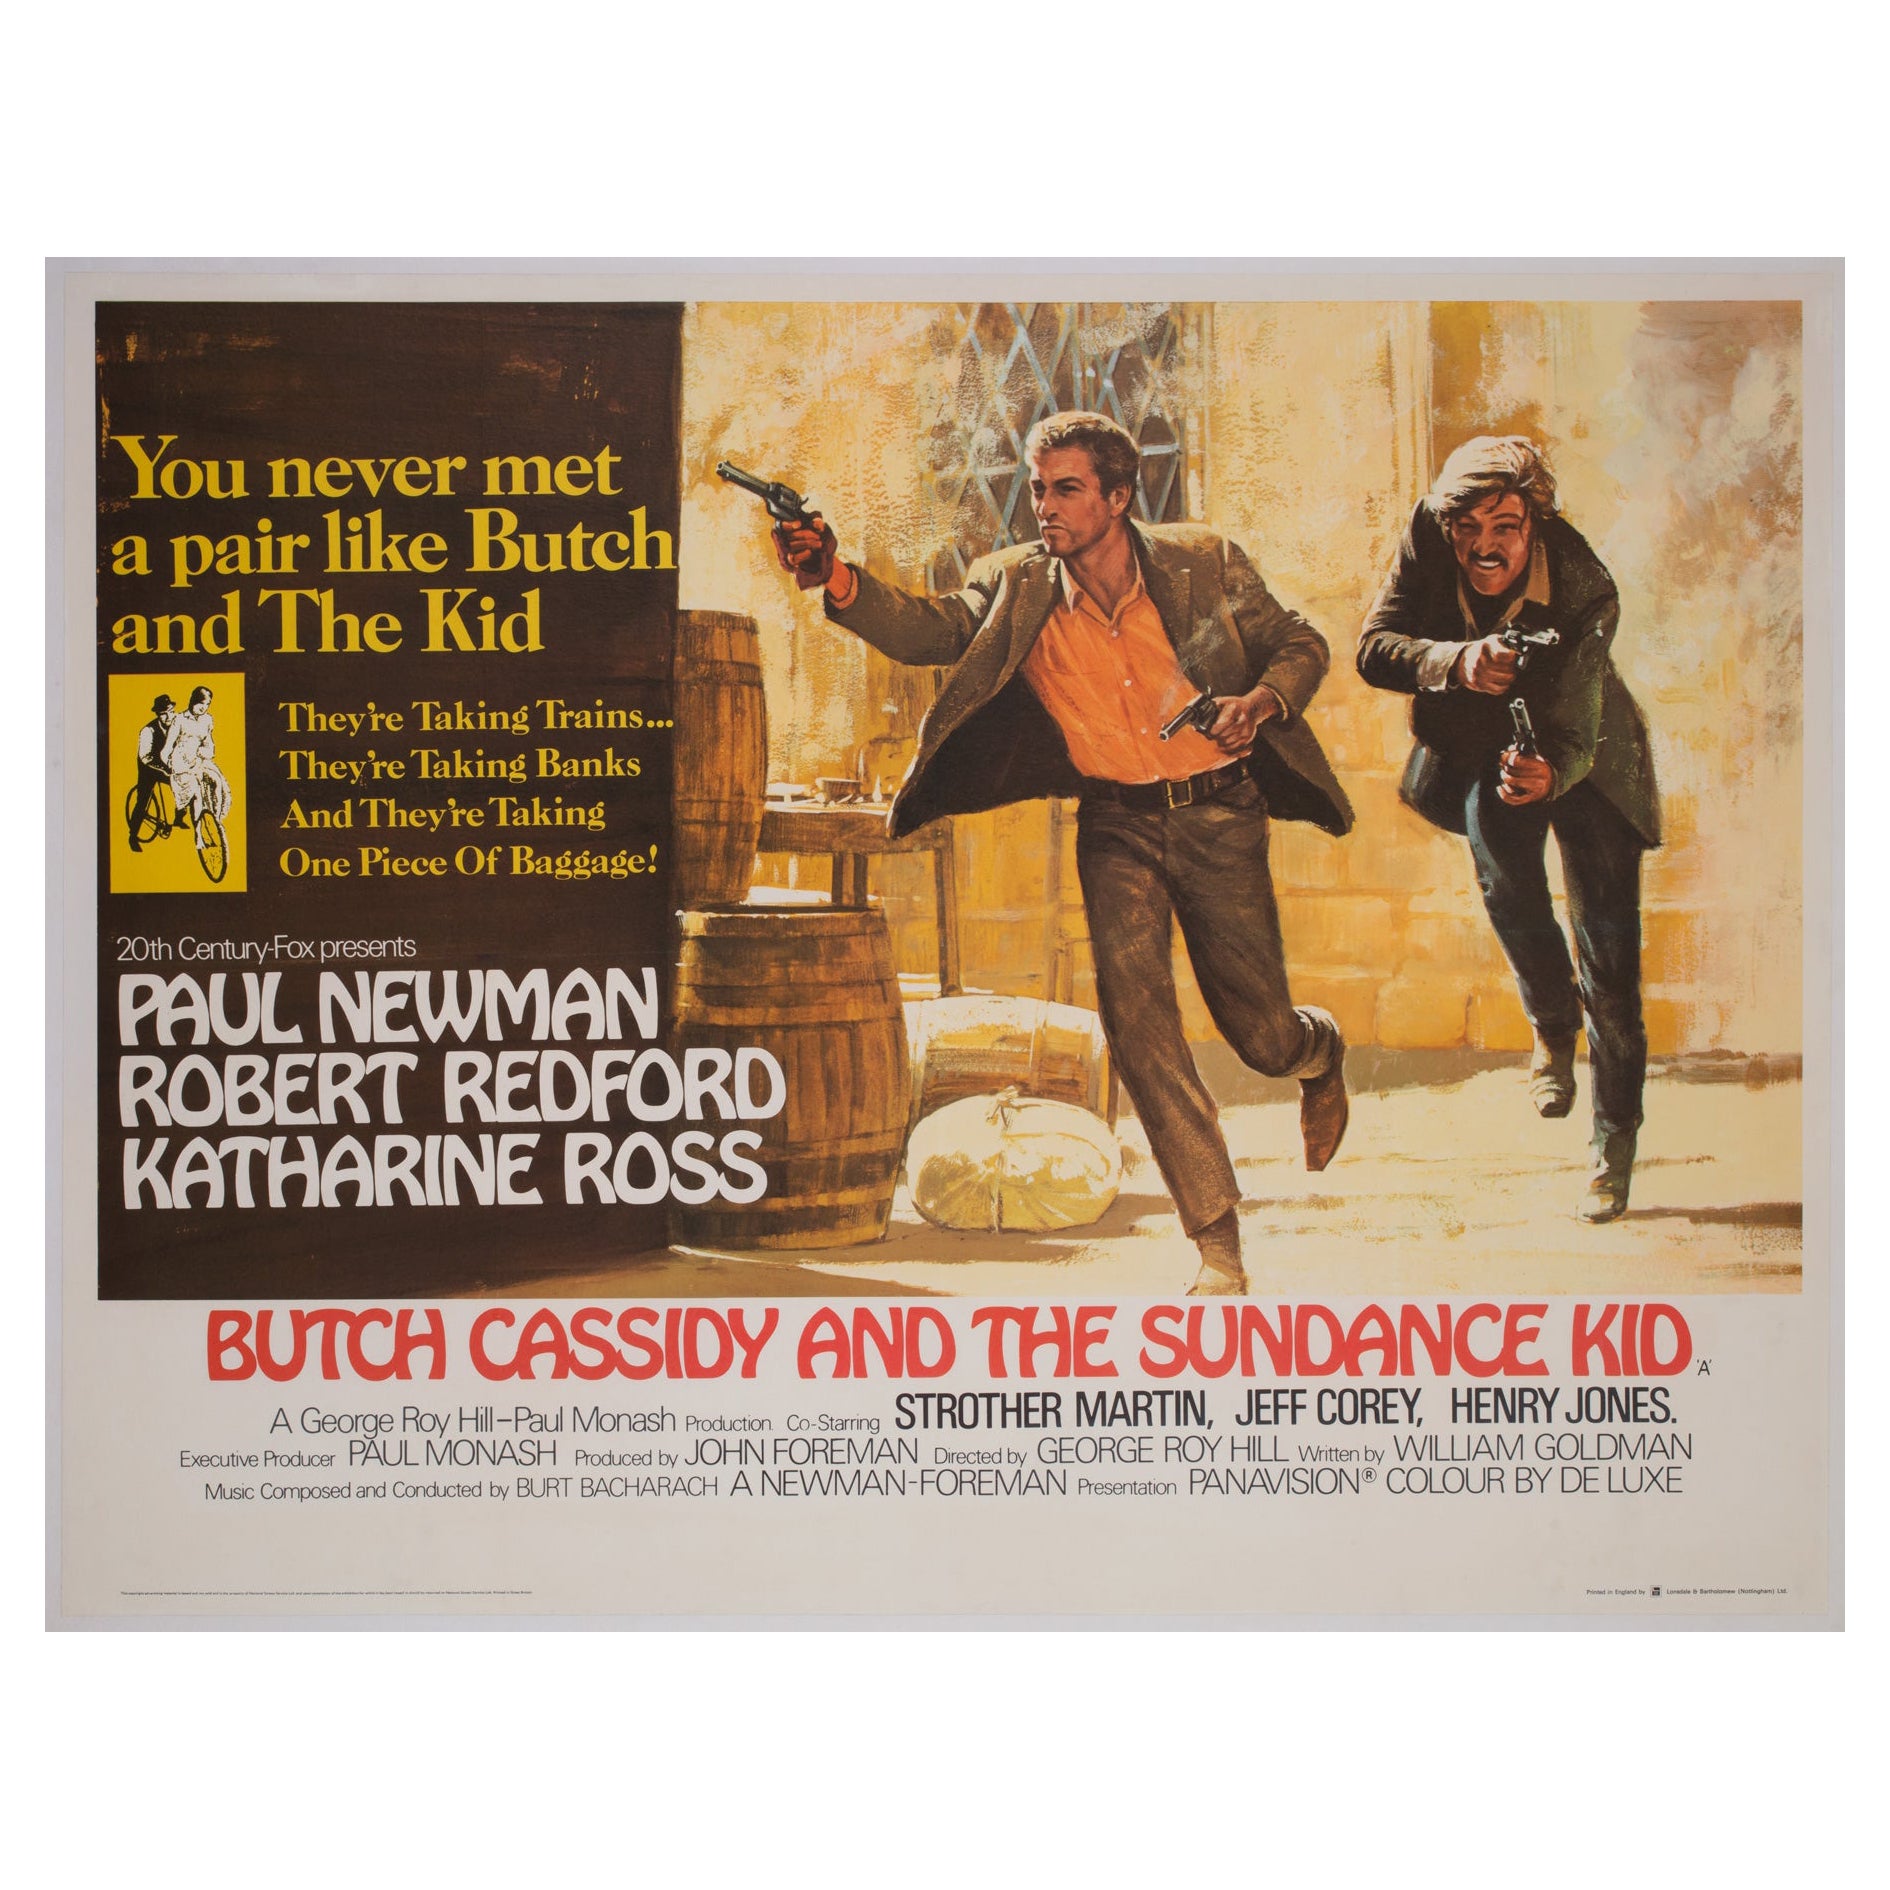 Butch Cassidy and the Sundance Kid UK Film Movie Poster, Tom Beauvais, 1969